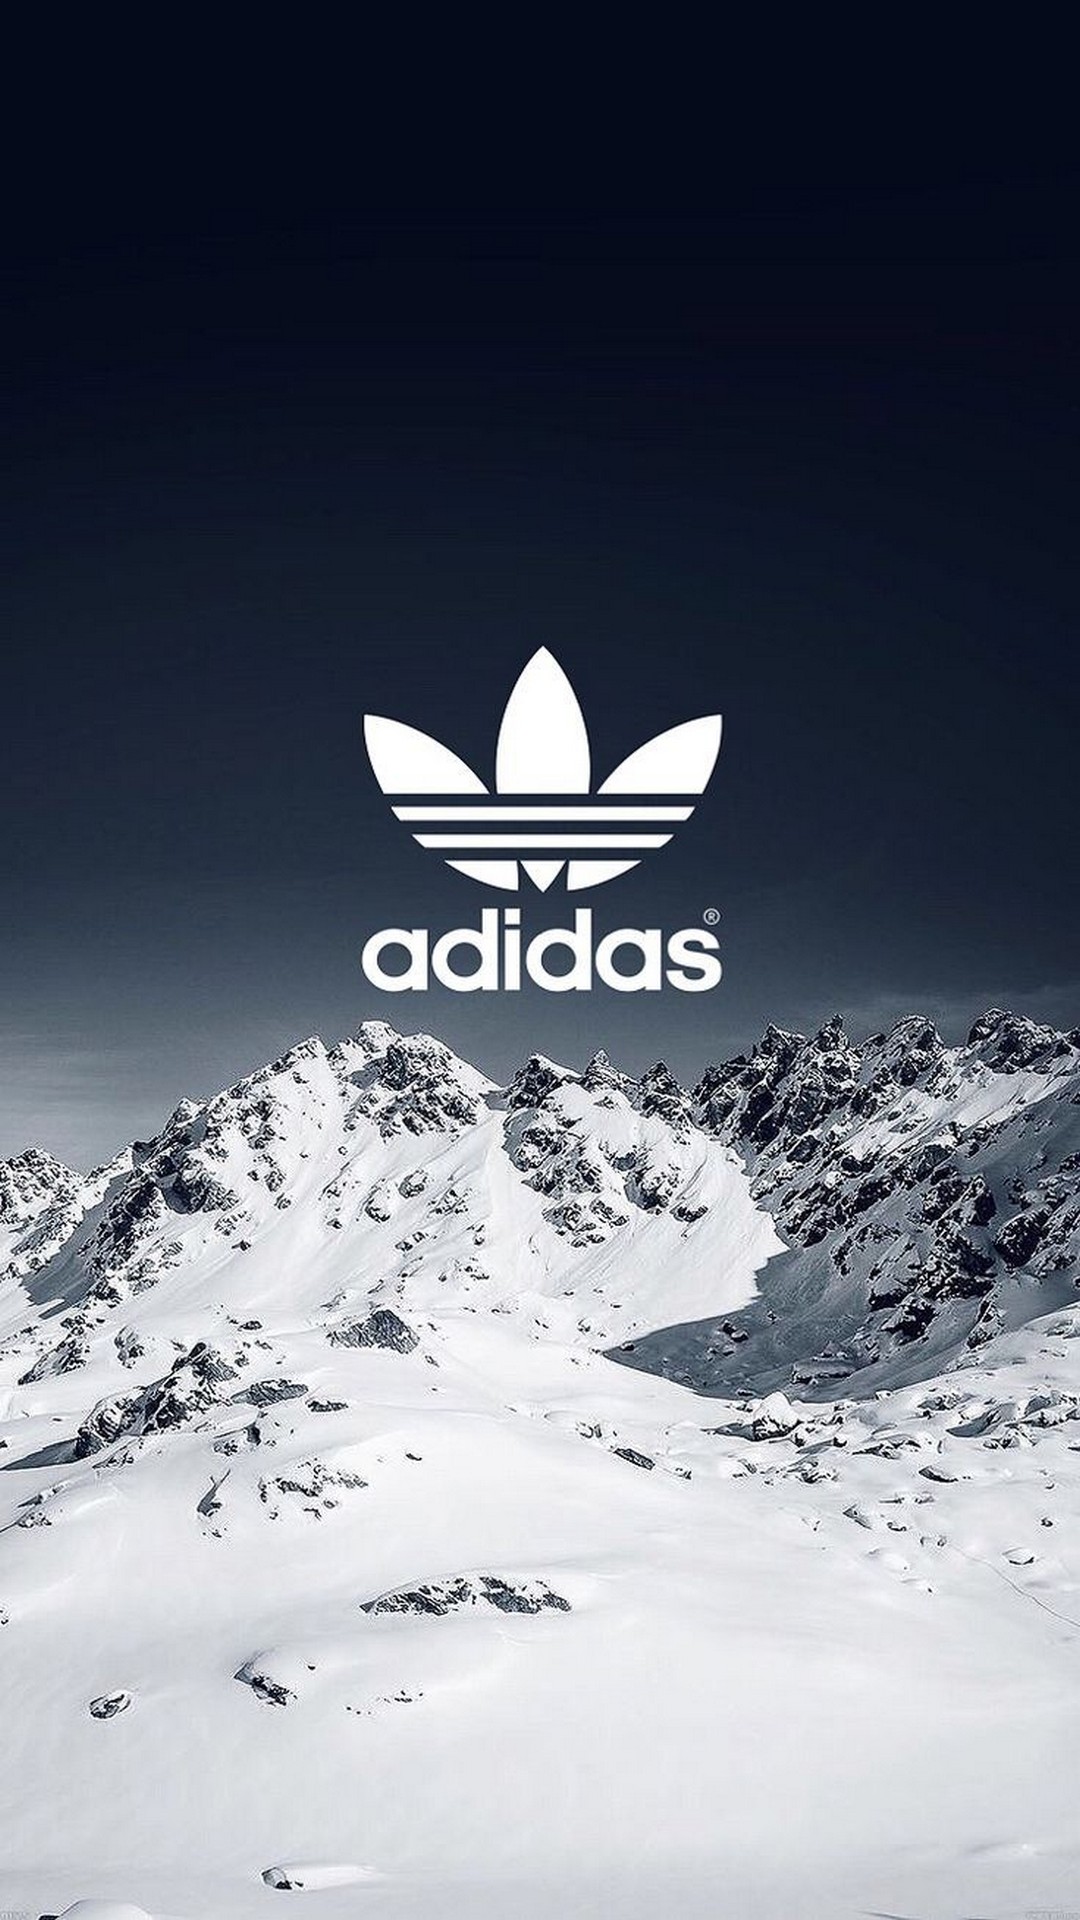 Adidas Logo iPhone 7 Wallpaper With high-resolution 1080X1920 pixel. You can use this wallpaper for your iPhone 5, 6, 7, 8, X, XS, XR backgrounds, Mobile Screensaver, or iPad Lock Screen